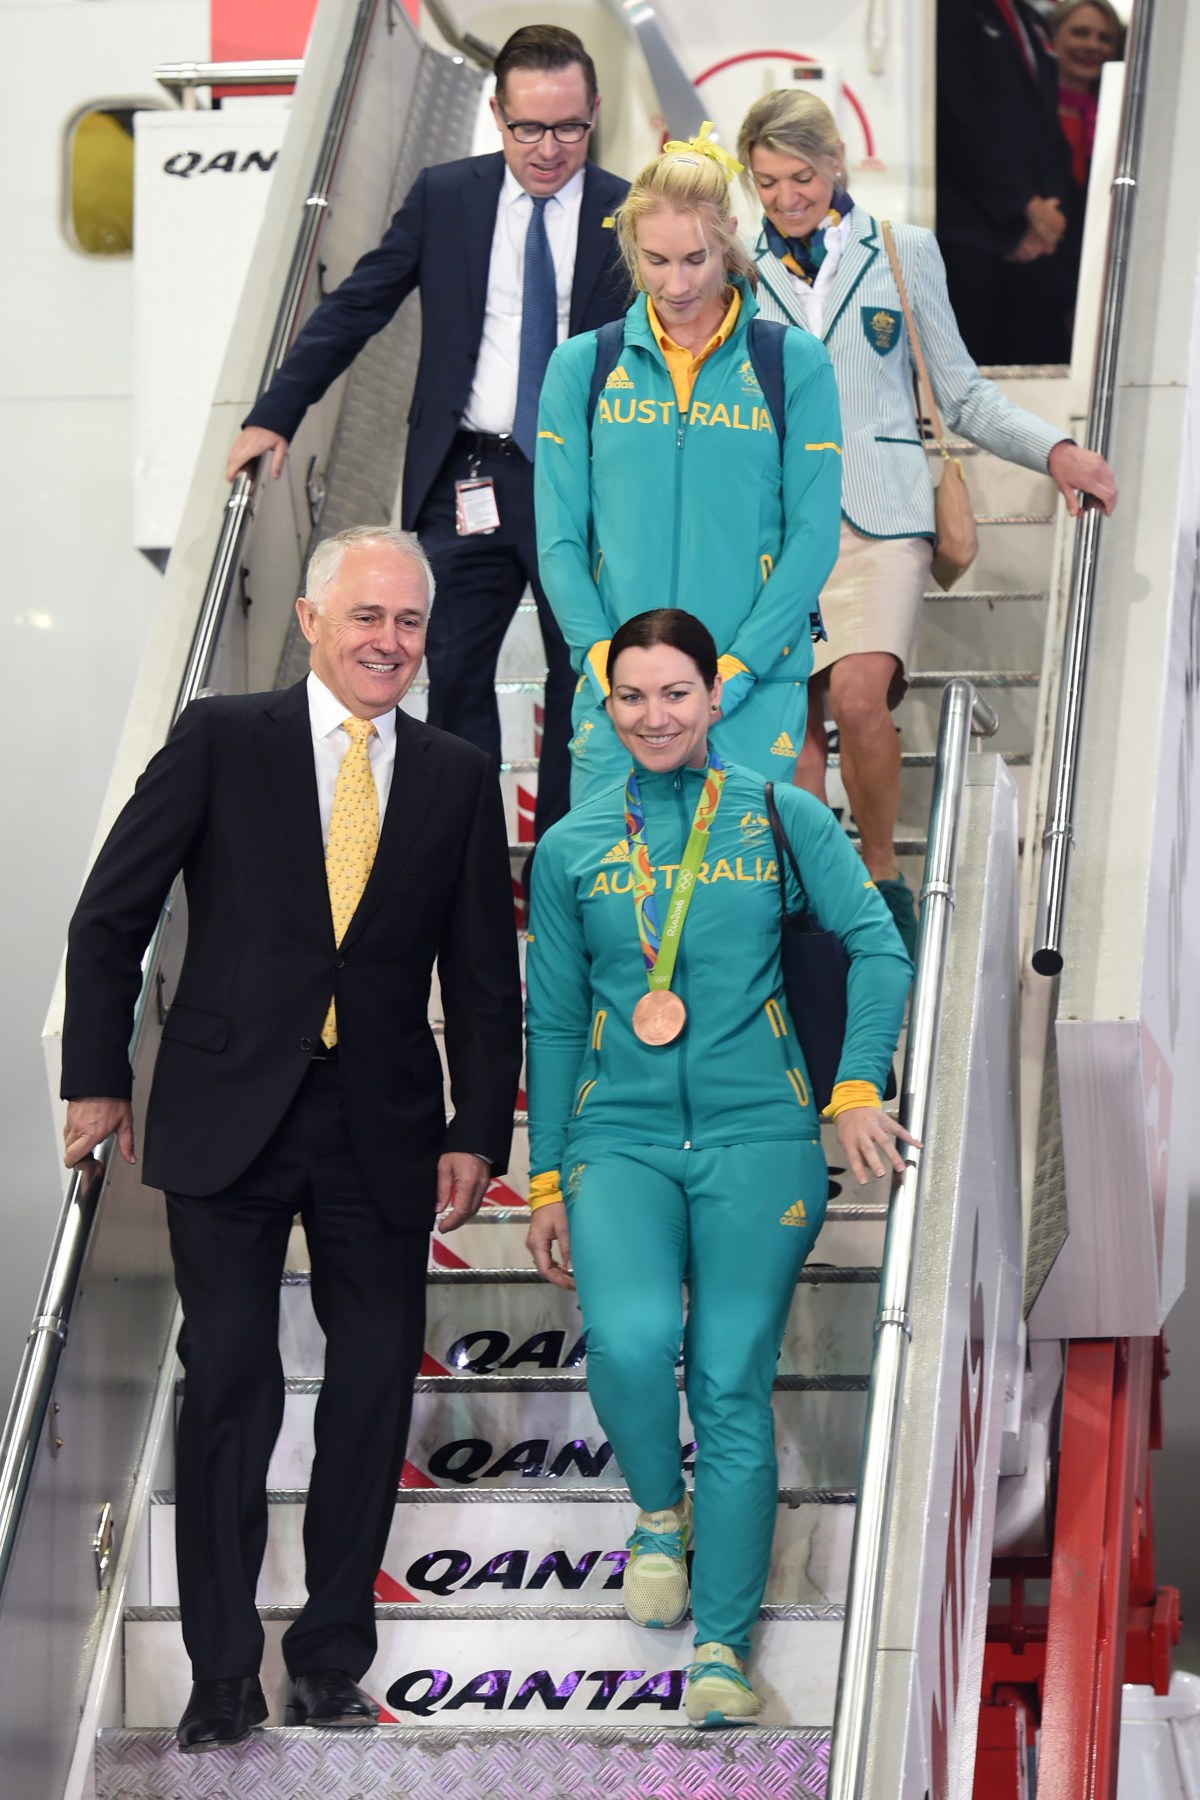 Australian Olympic team members Anna Mears (right), Kim Brennan (centre) and chef de mission Kitty Chiller are welcomed home by Australian Prime Minister Malcolm Turnbull (left), and Qantas CEO Alan Joyce, from Rio de Janeiro on their return from the XXXI Summer Olympics, in Sydney on Wednesday, Aug. 24, 2016. (AAP Image/Paul Miller) NO ARCHIVING